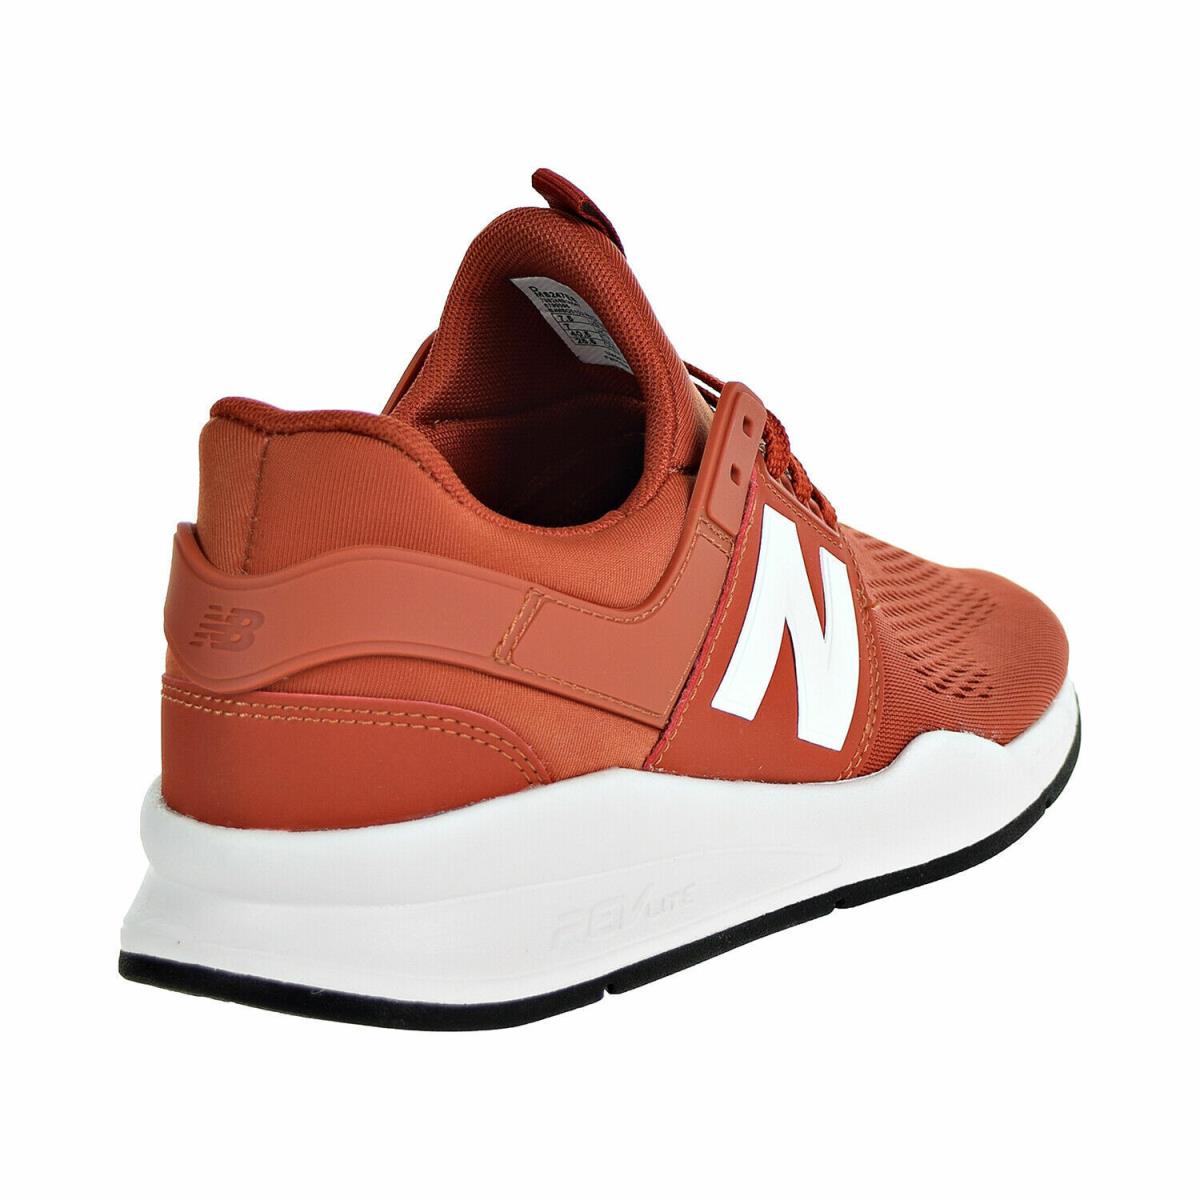 New Balance shoes  - Vintage Russet/White 0